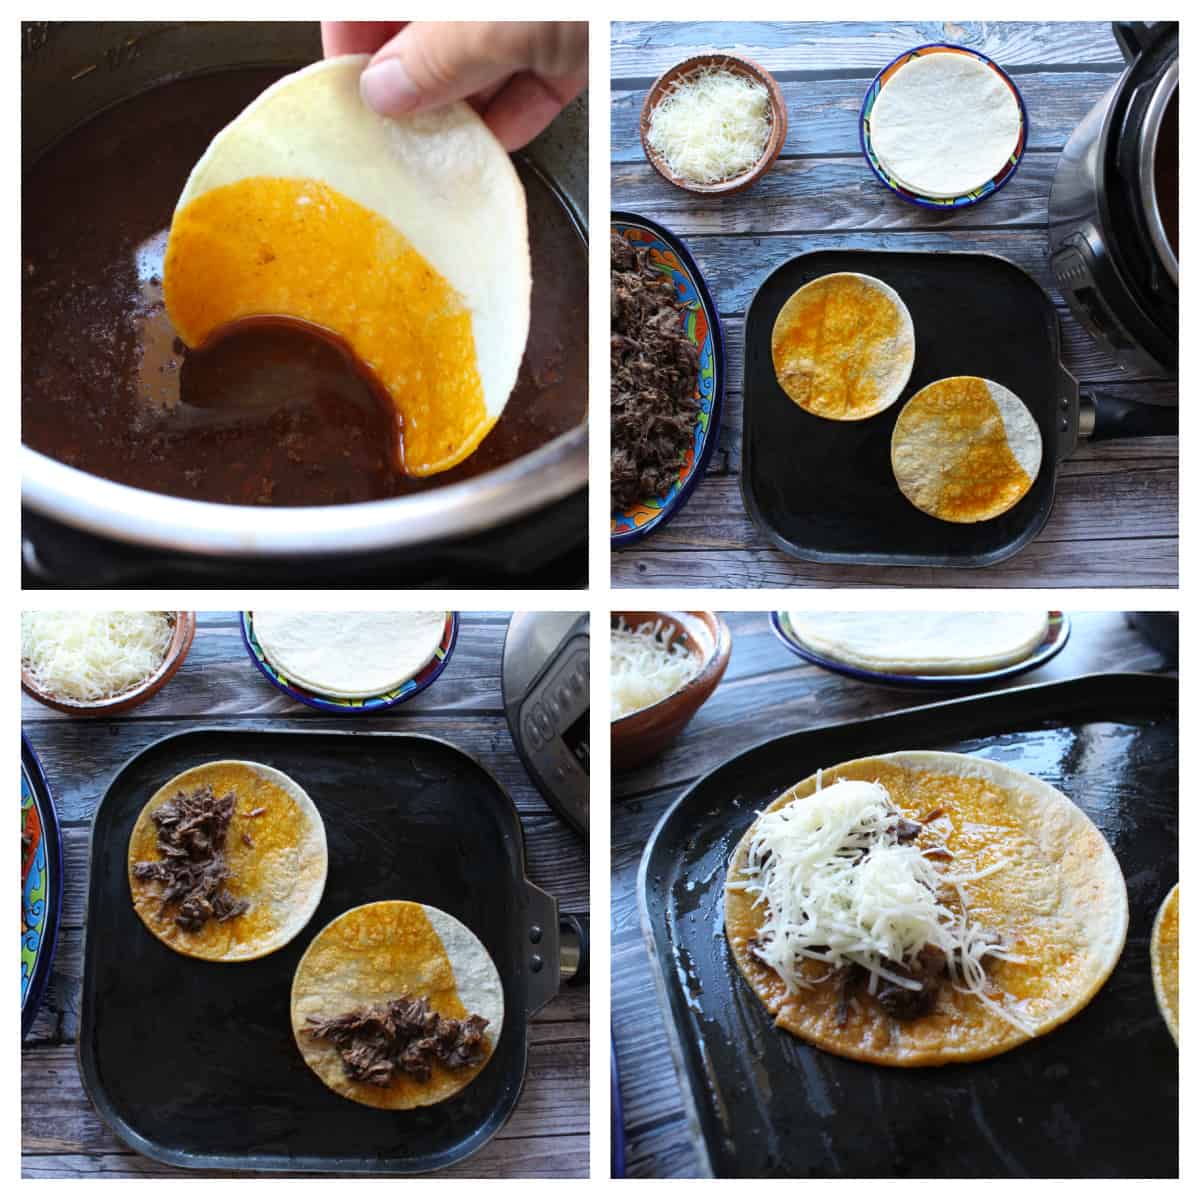 A collage showing how to make the quesatacos de birra.